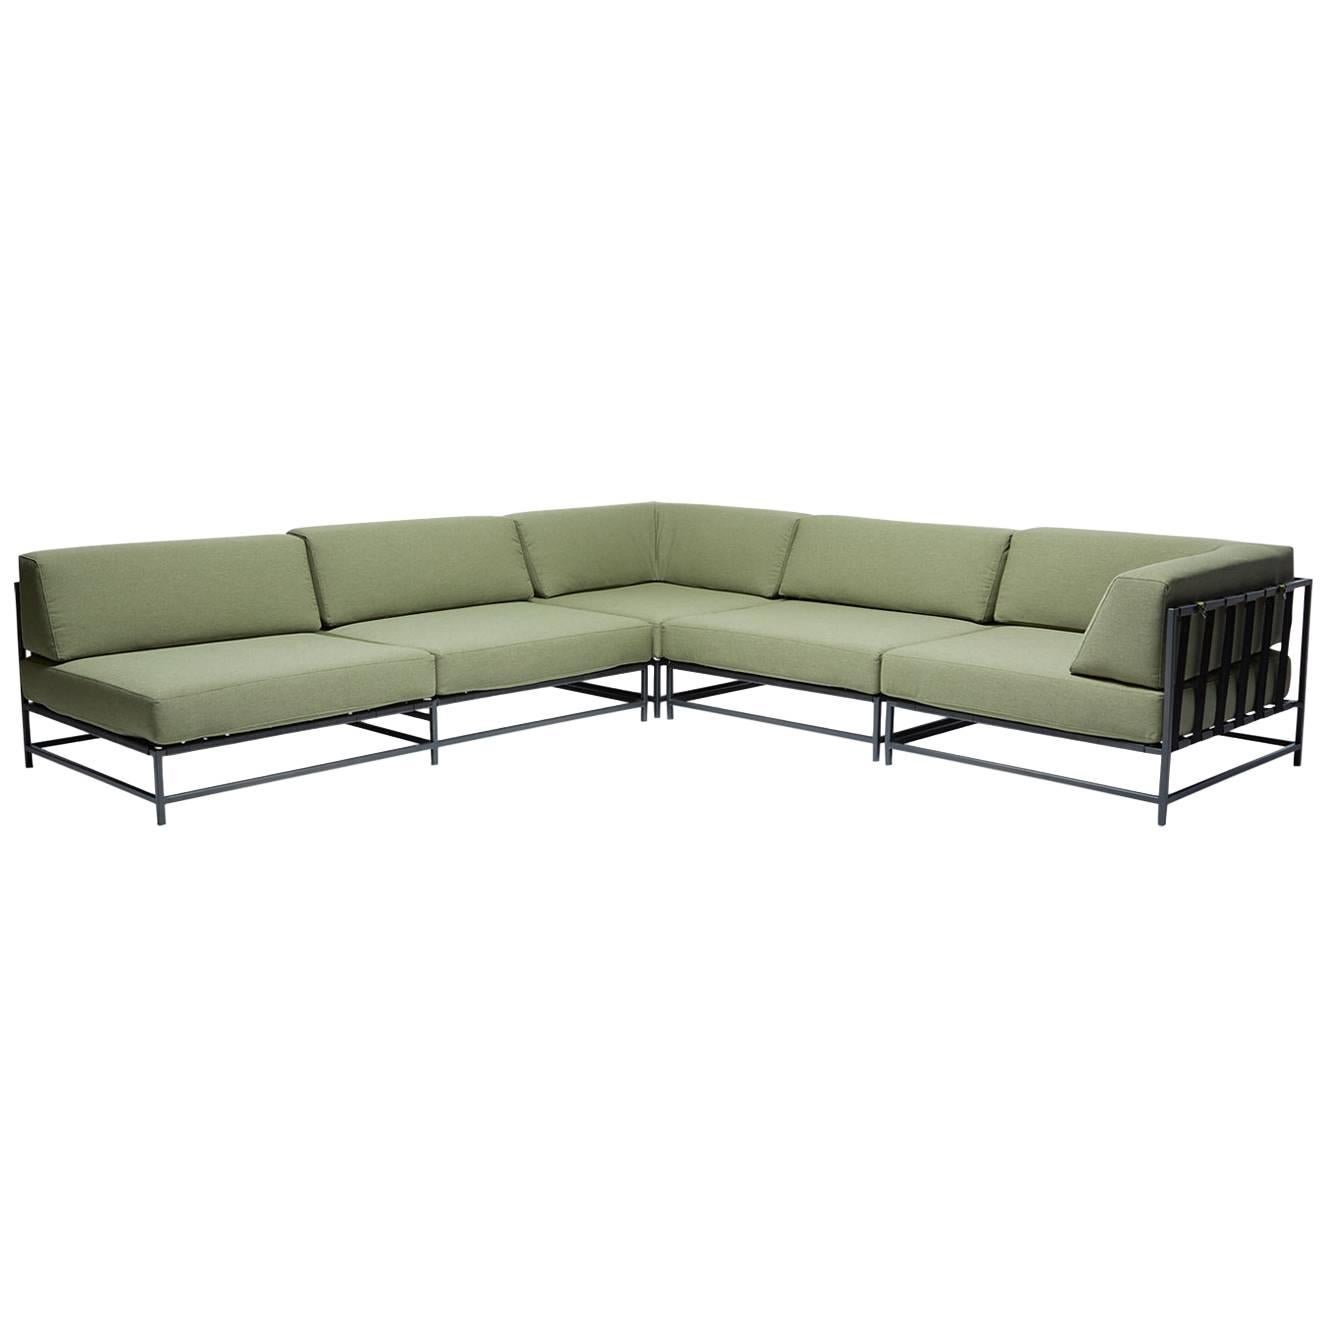 Outdoor Leaf & Charcoal Sectional For Sale